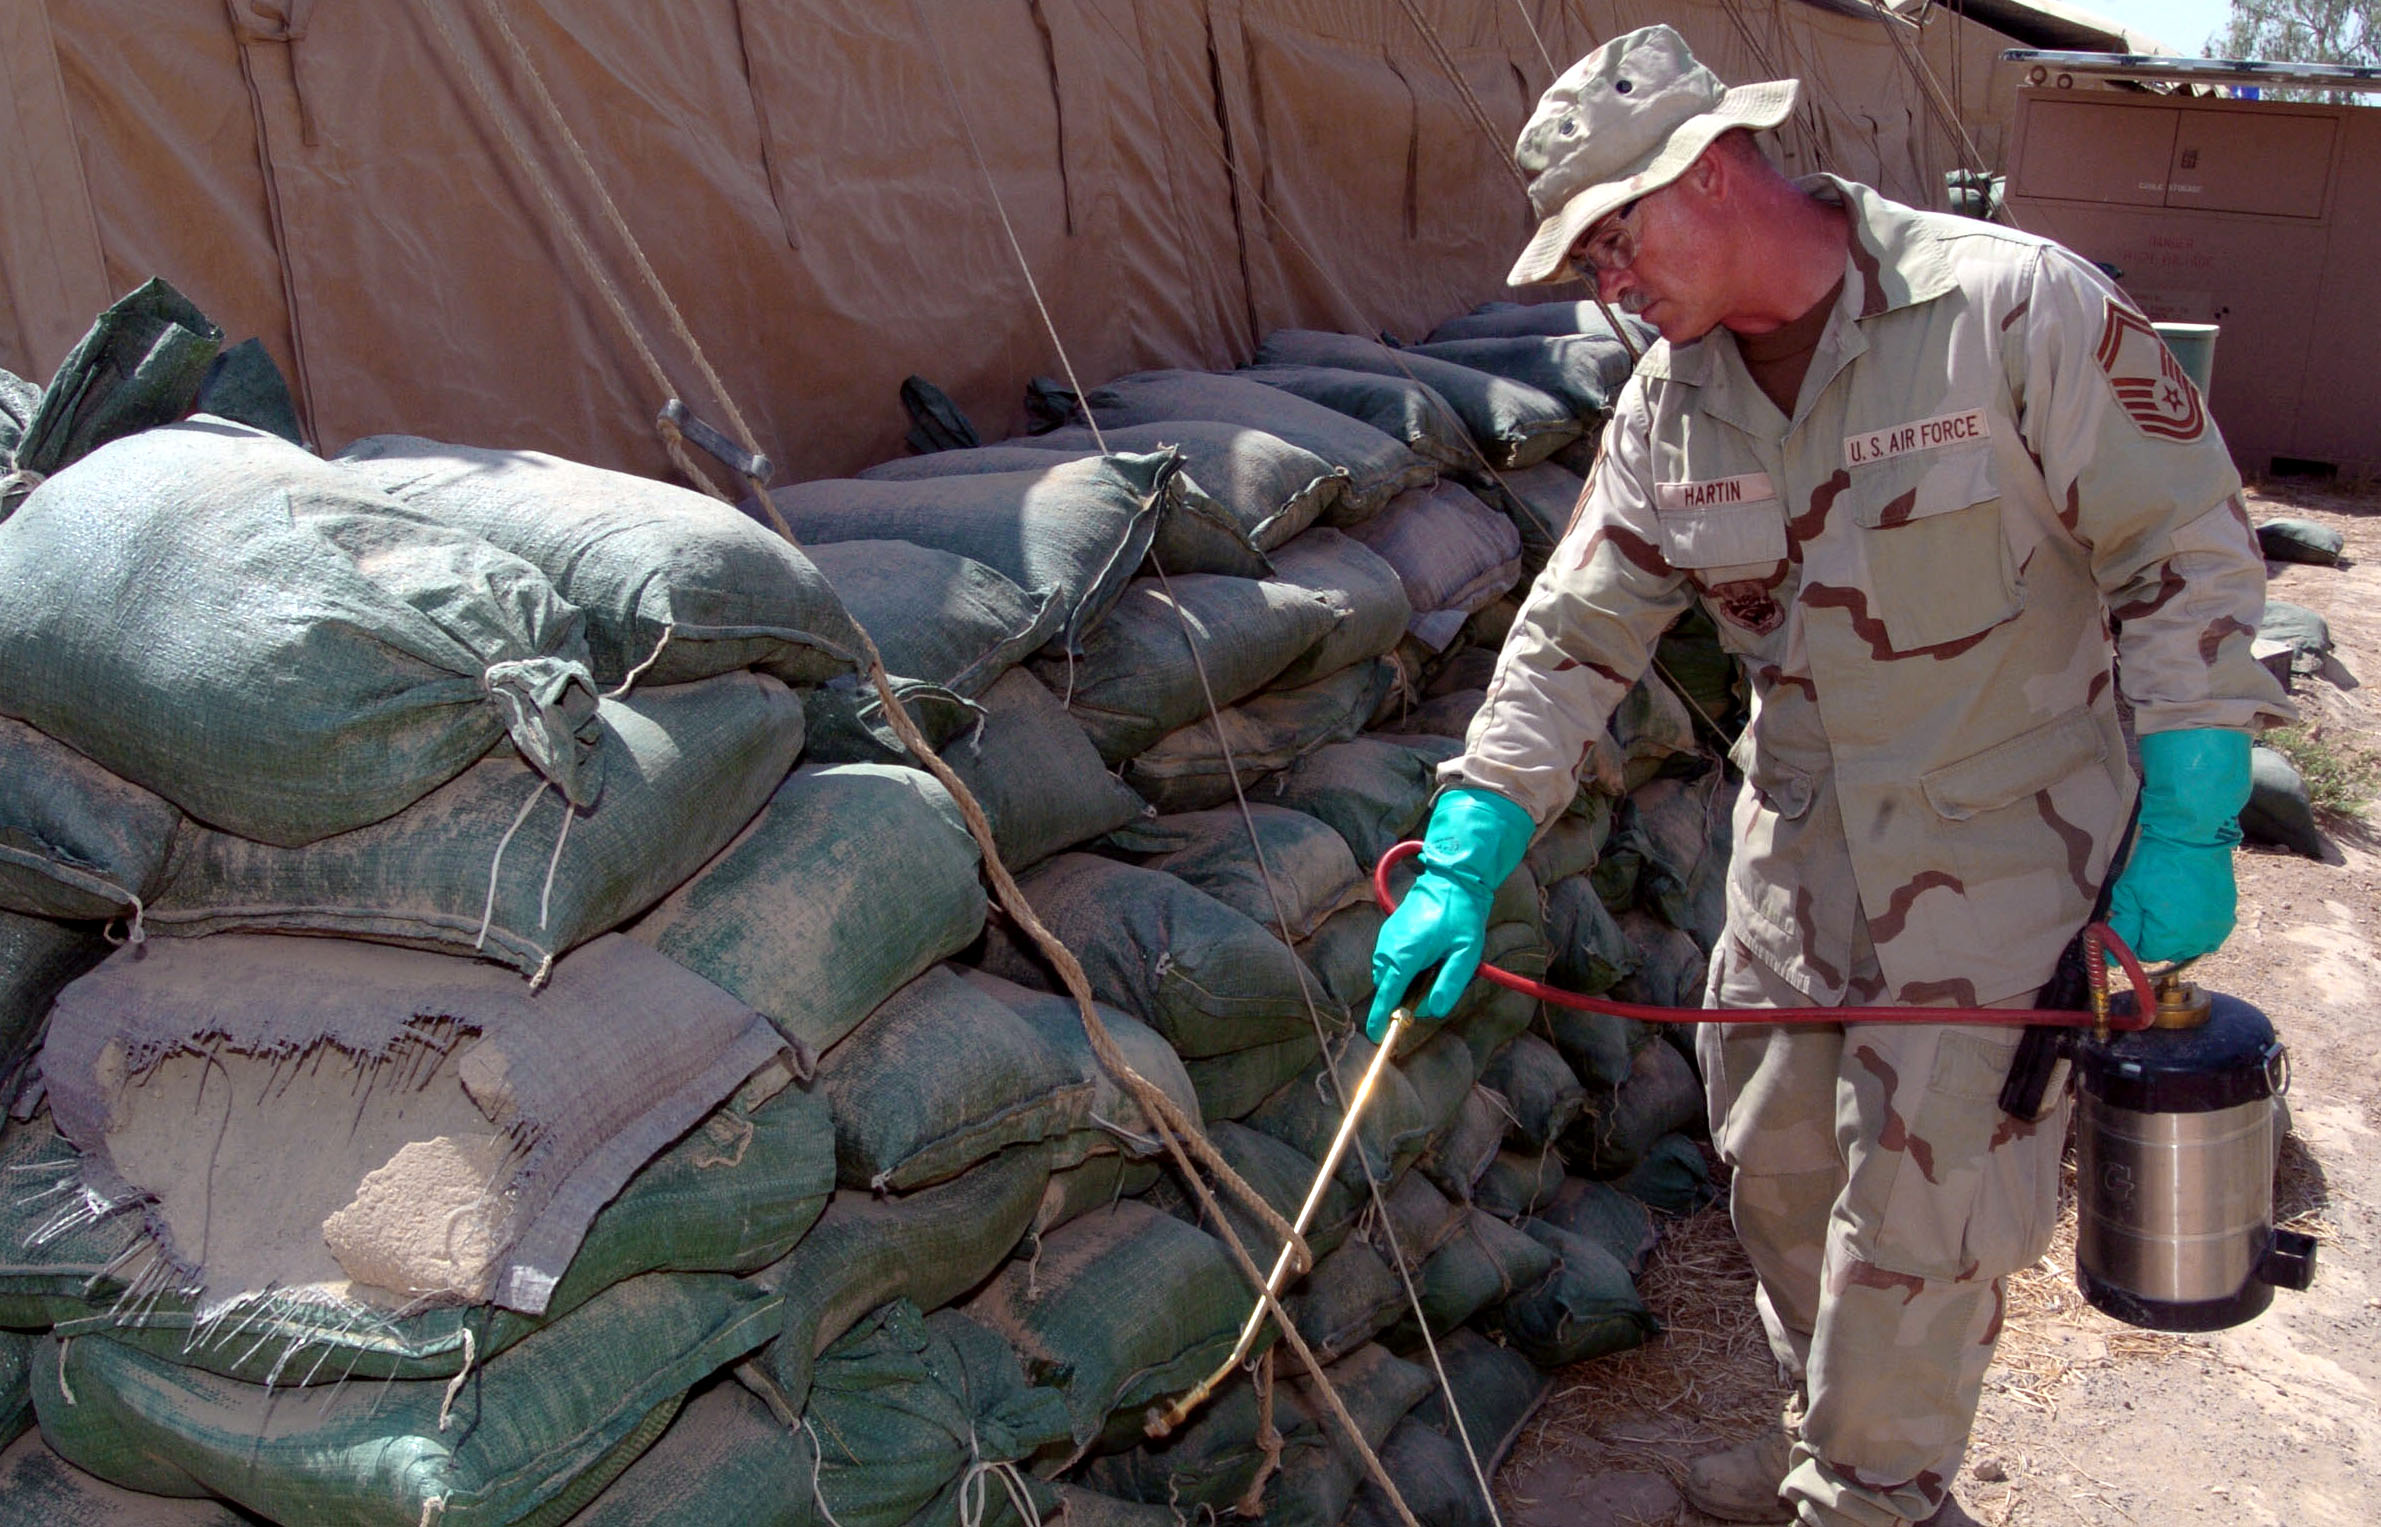 BALAD AIR BASE, Iraq -- Senior Master Sgt. Burhl Hartin sprays insecticide at the base of a tent here Aug. 3.  Sergeant Hartin is a pest management specialist with the 332nd Expeditionary Civil Engineer Squadron.  He is deployed from the 125th Fighter Wing in Jacksonville, Fla.  (U.S. Air Force photo by Staff Sgt. Cohen Young)